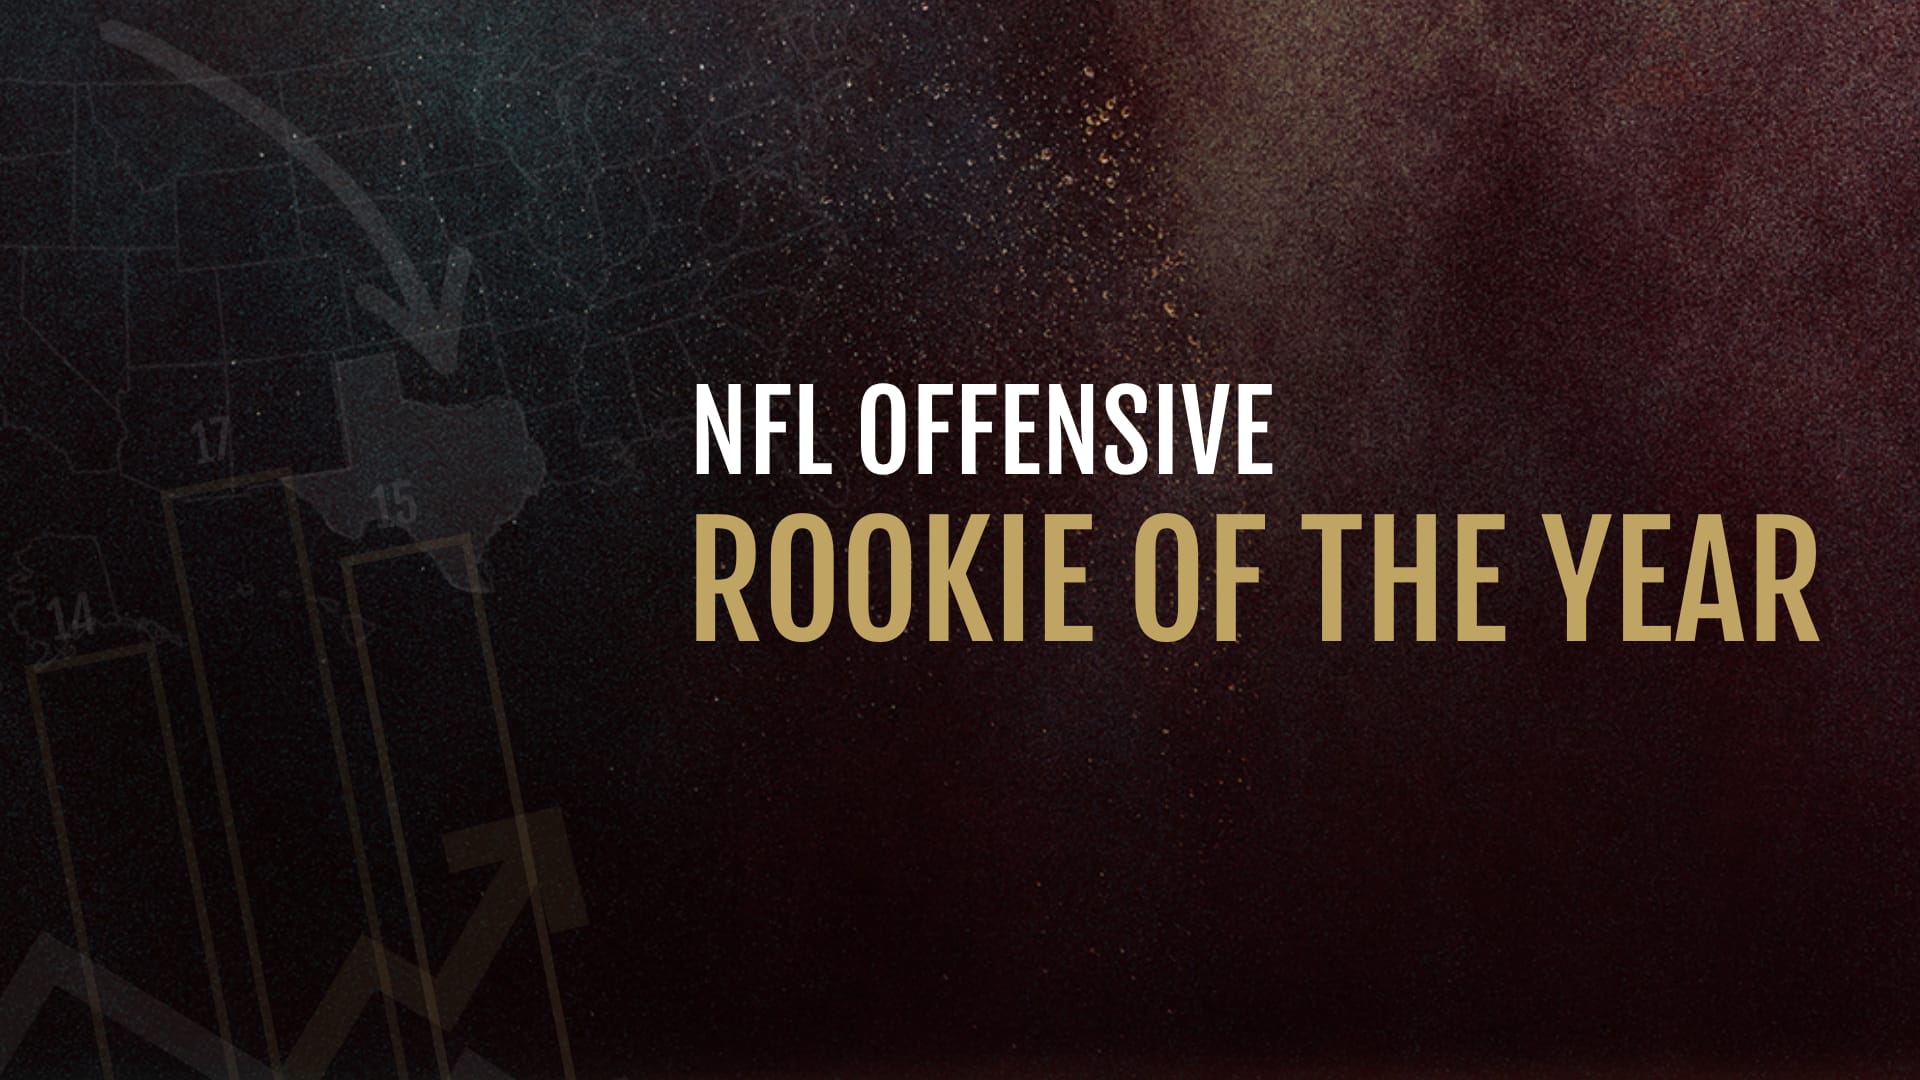 NFL Offensive Rookie of the Year Odds